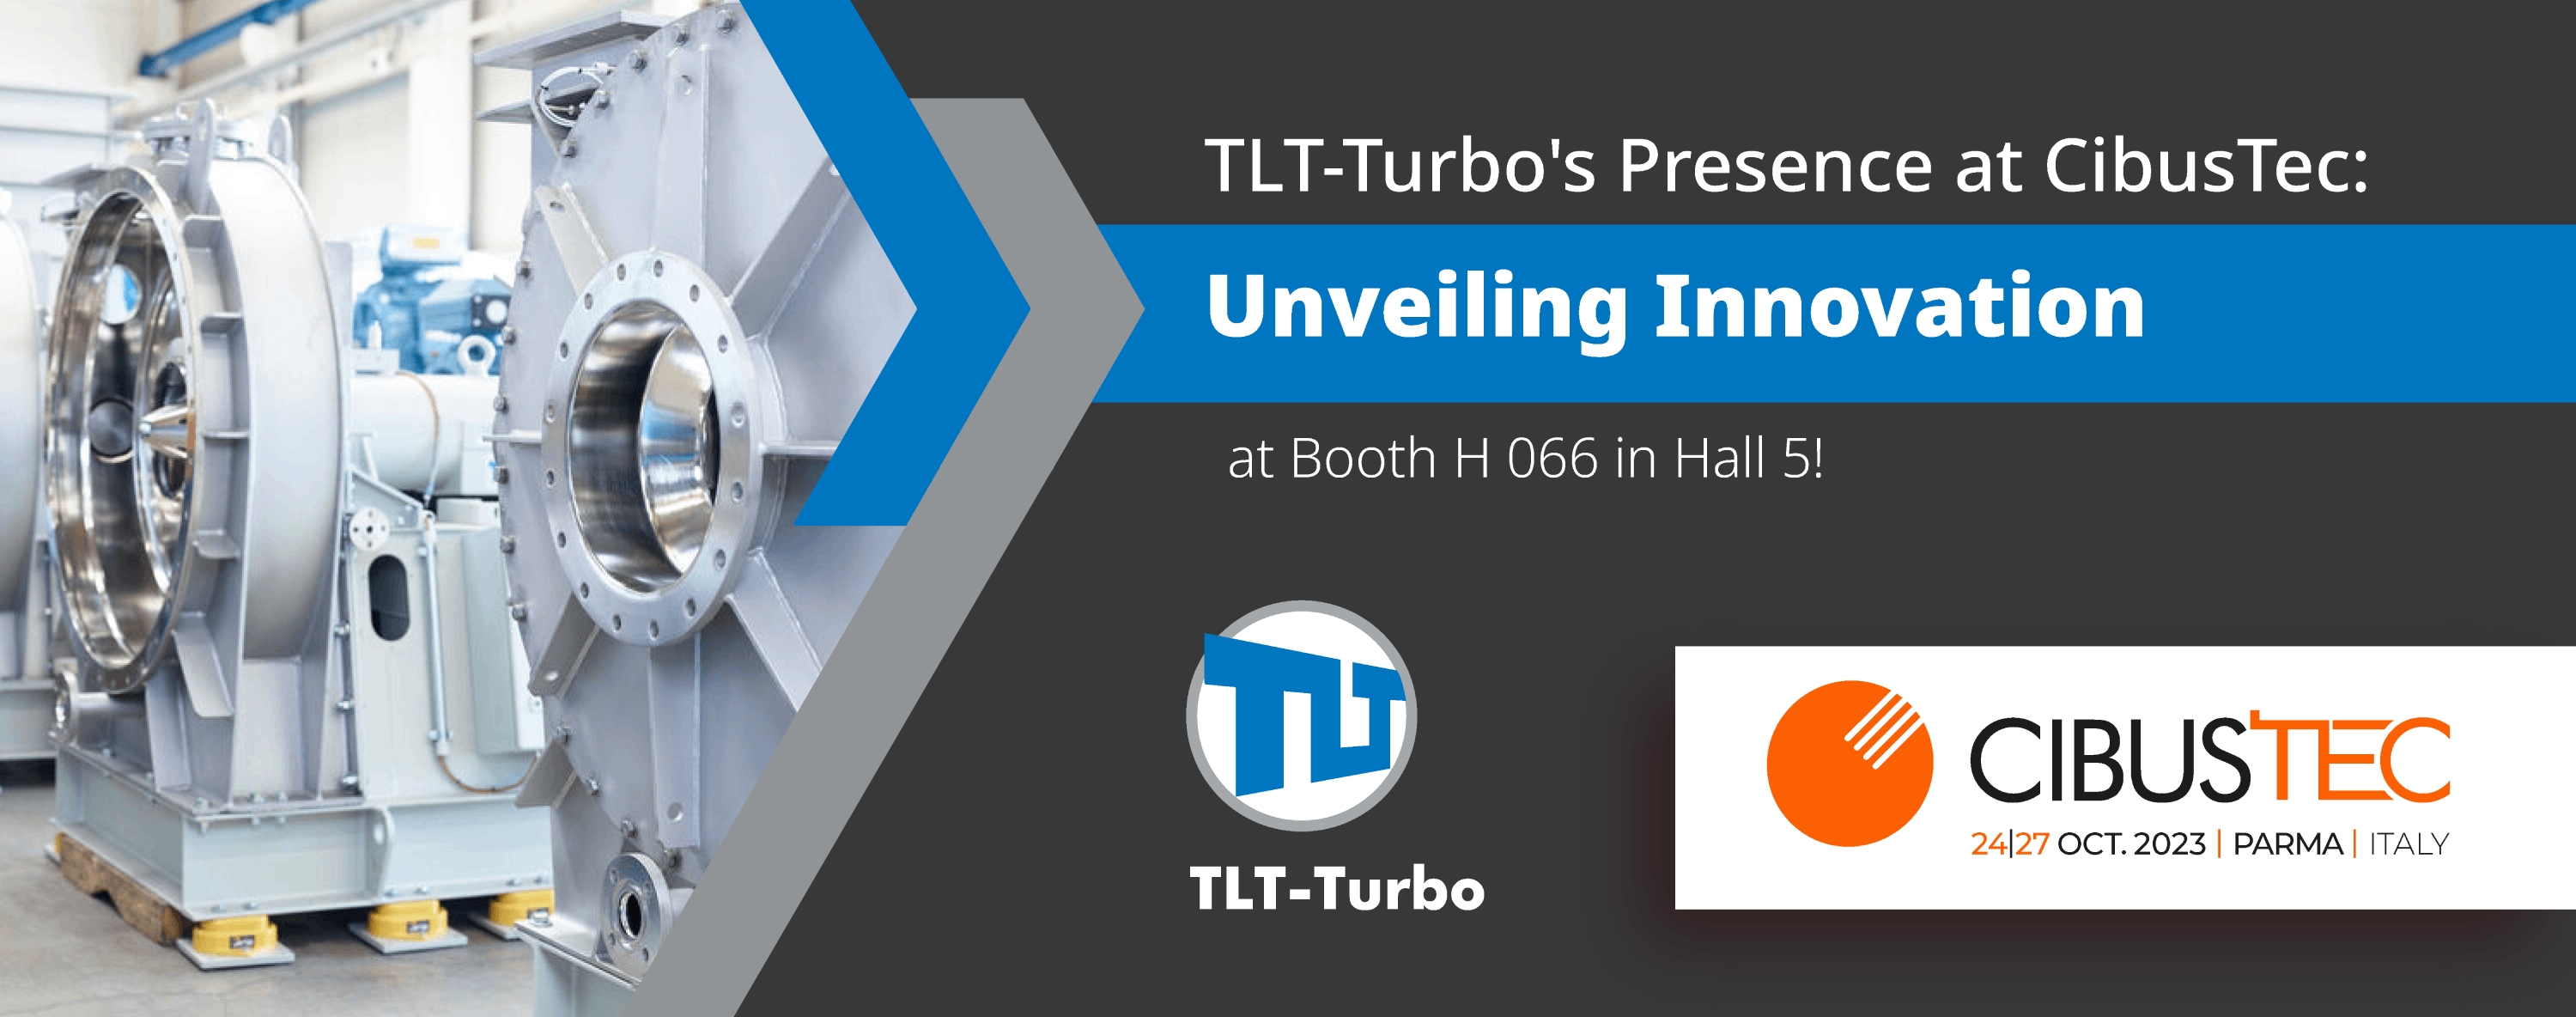 TLT-Turbo's Presence at CibusTec: Unveiling Innovation at Booth H 066 in Hall 5!